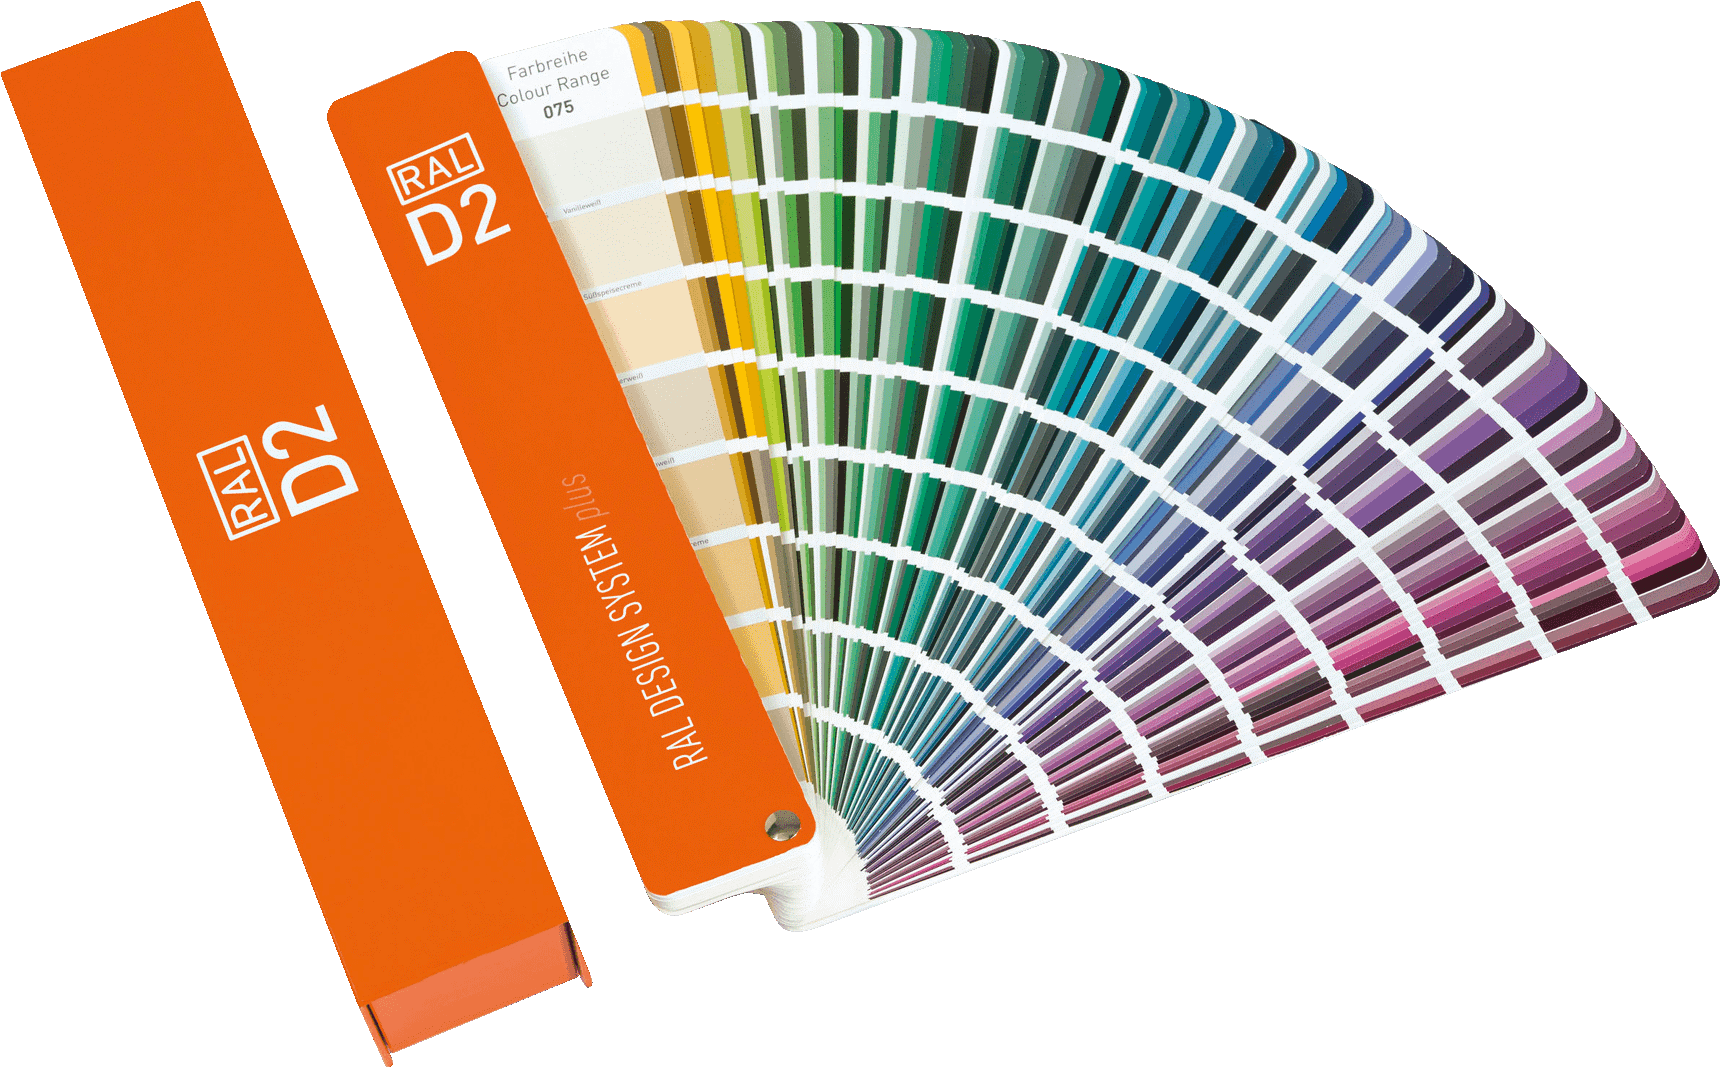 Ral D2 Colour Chart, Hd Png Download